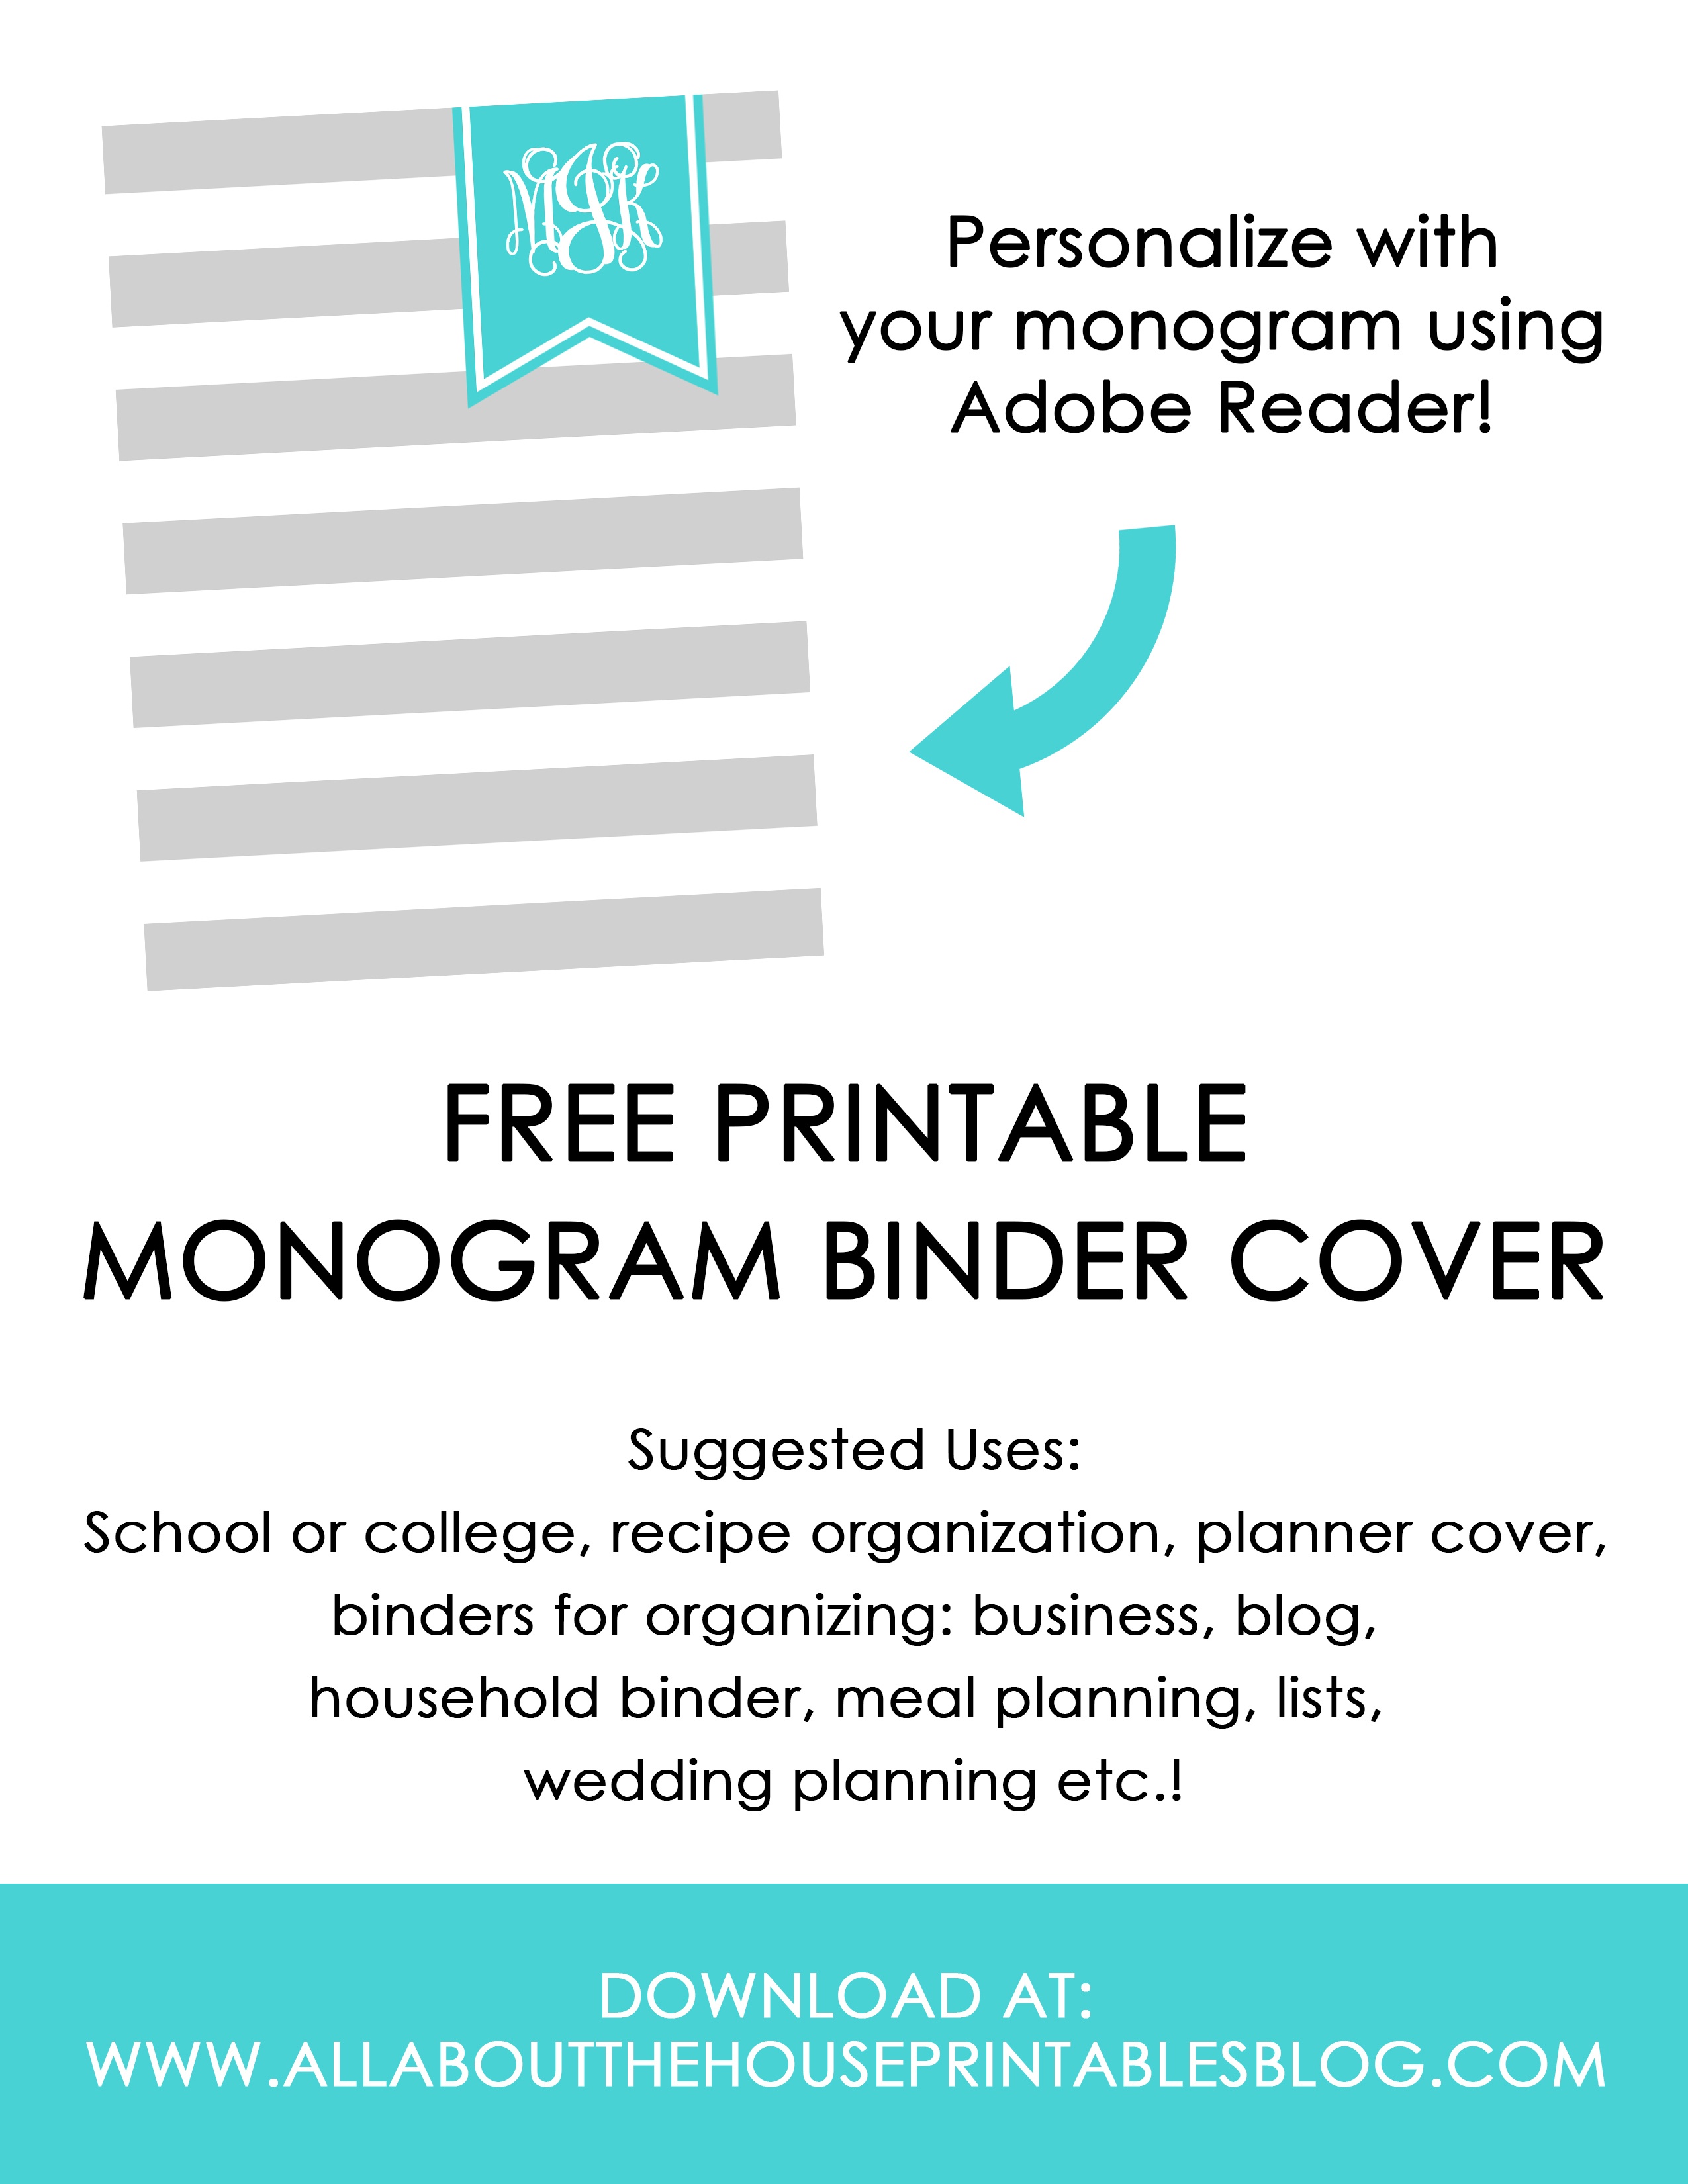 Ways To Organize Using Binder Covers (Plus A Free Printable Monogram - Free Printable Monogram Binder Covers